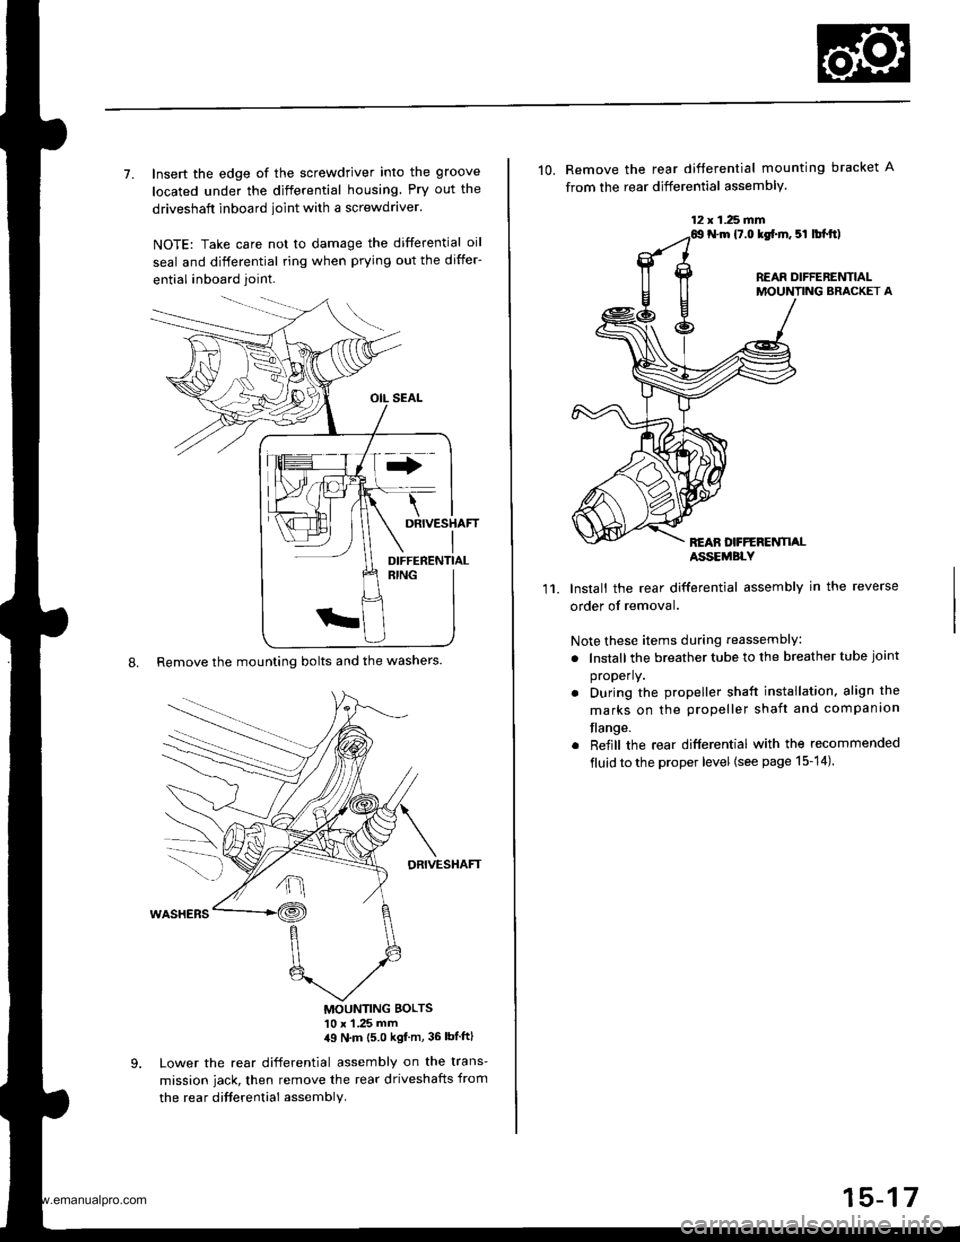 HONDA CR-V 1998 RD1-RD3 / 1.G User Guide 
7. Insert the edge of the screwdriver into the groove
located under the differential housing Pry out the
driveshaft inboard ioint with a screwdraver.
NOTE: Take care not to damage the differential oi